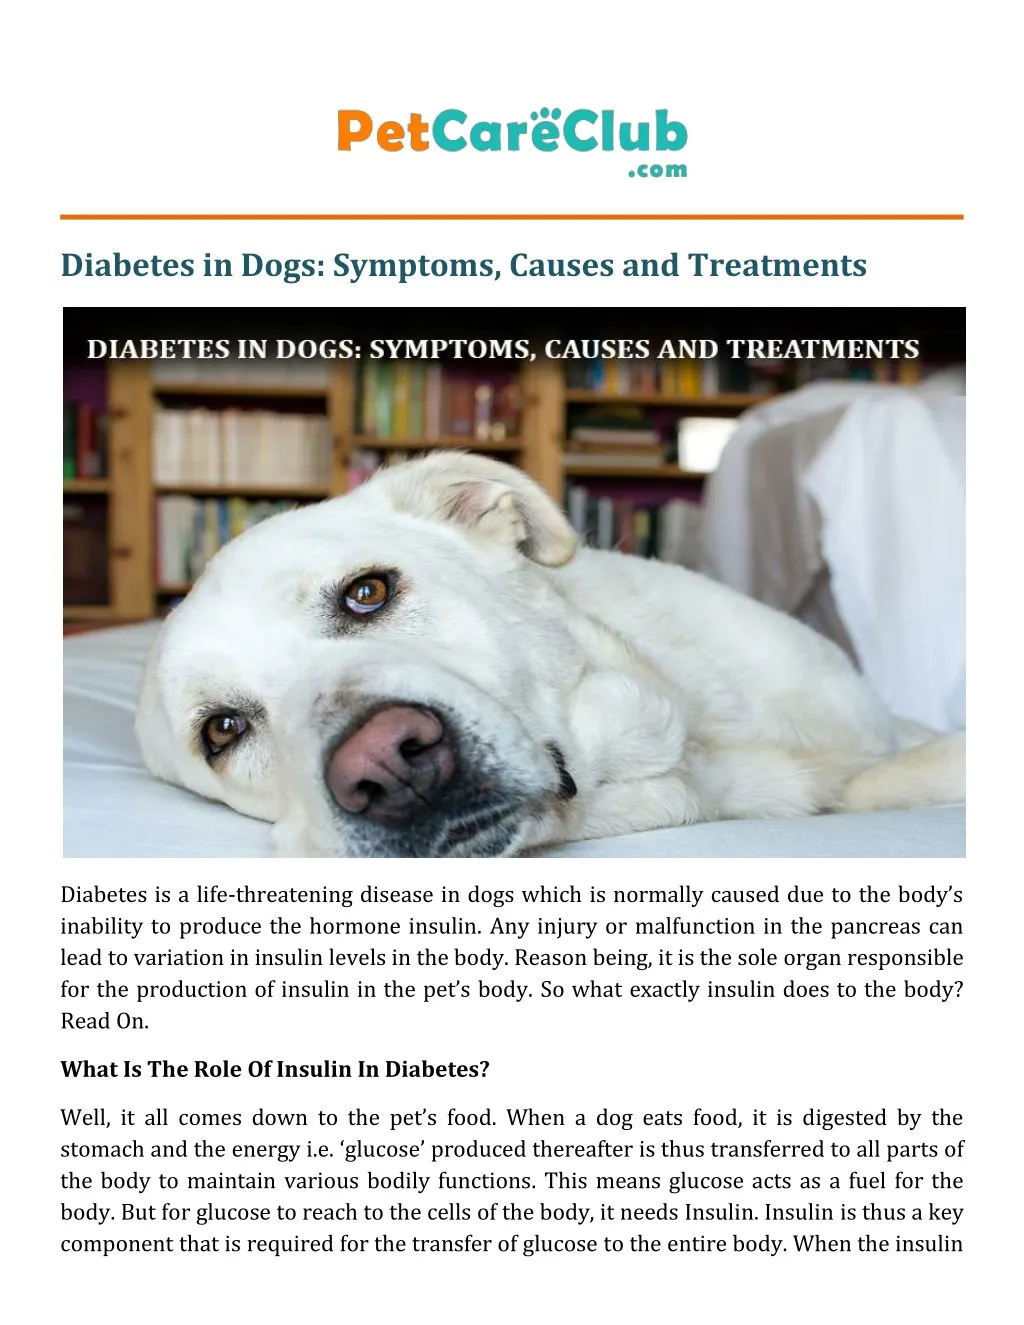 diabetes in dogs symptoms causes and treatments